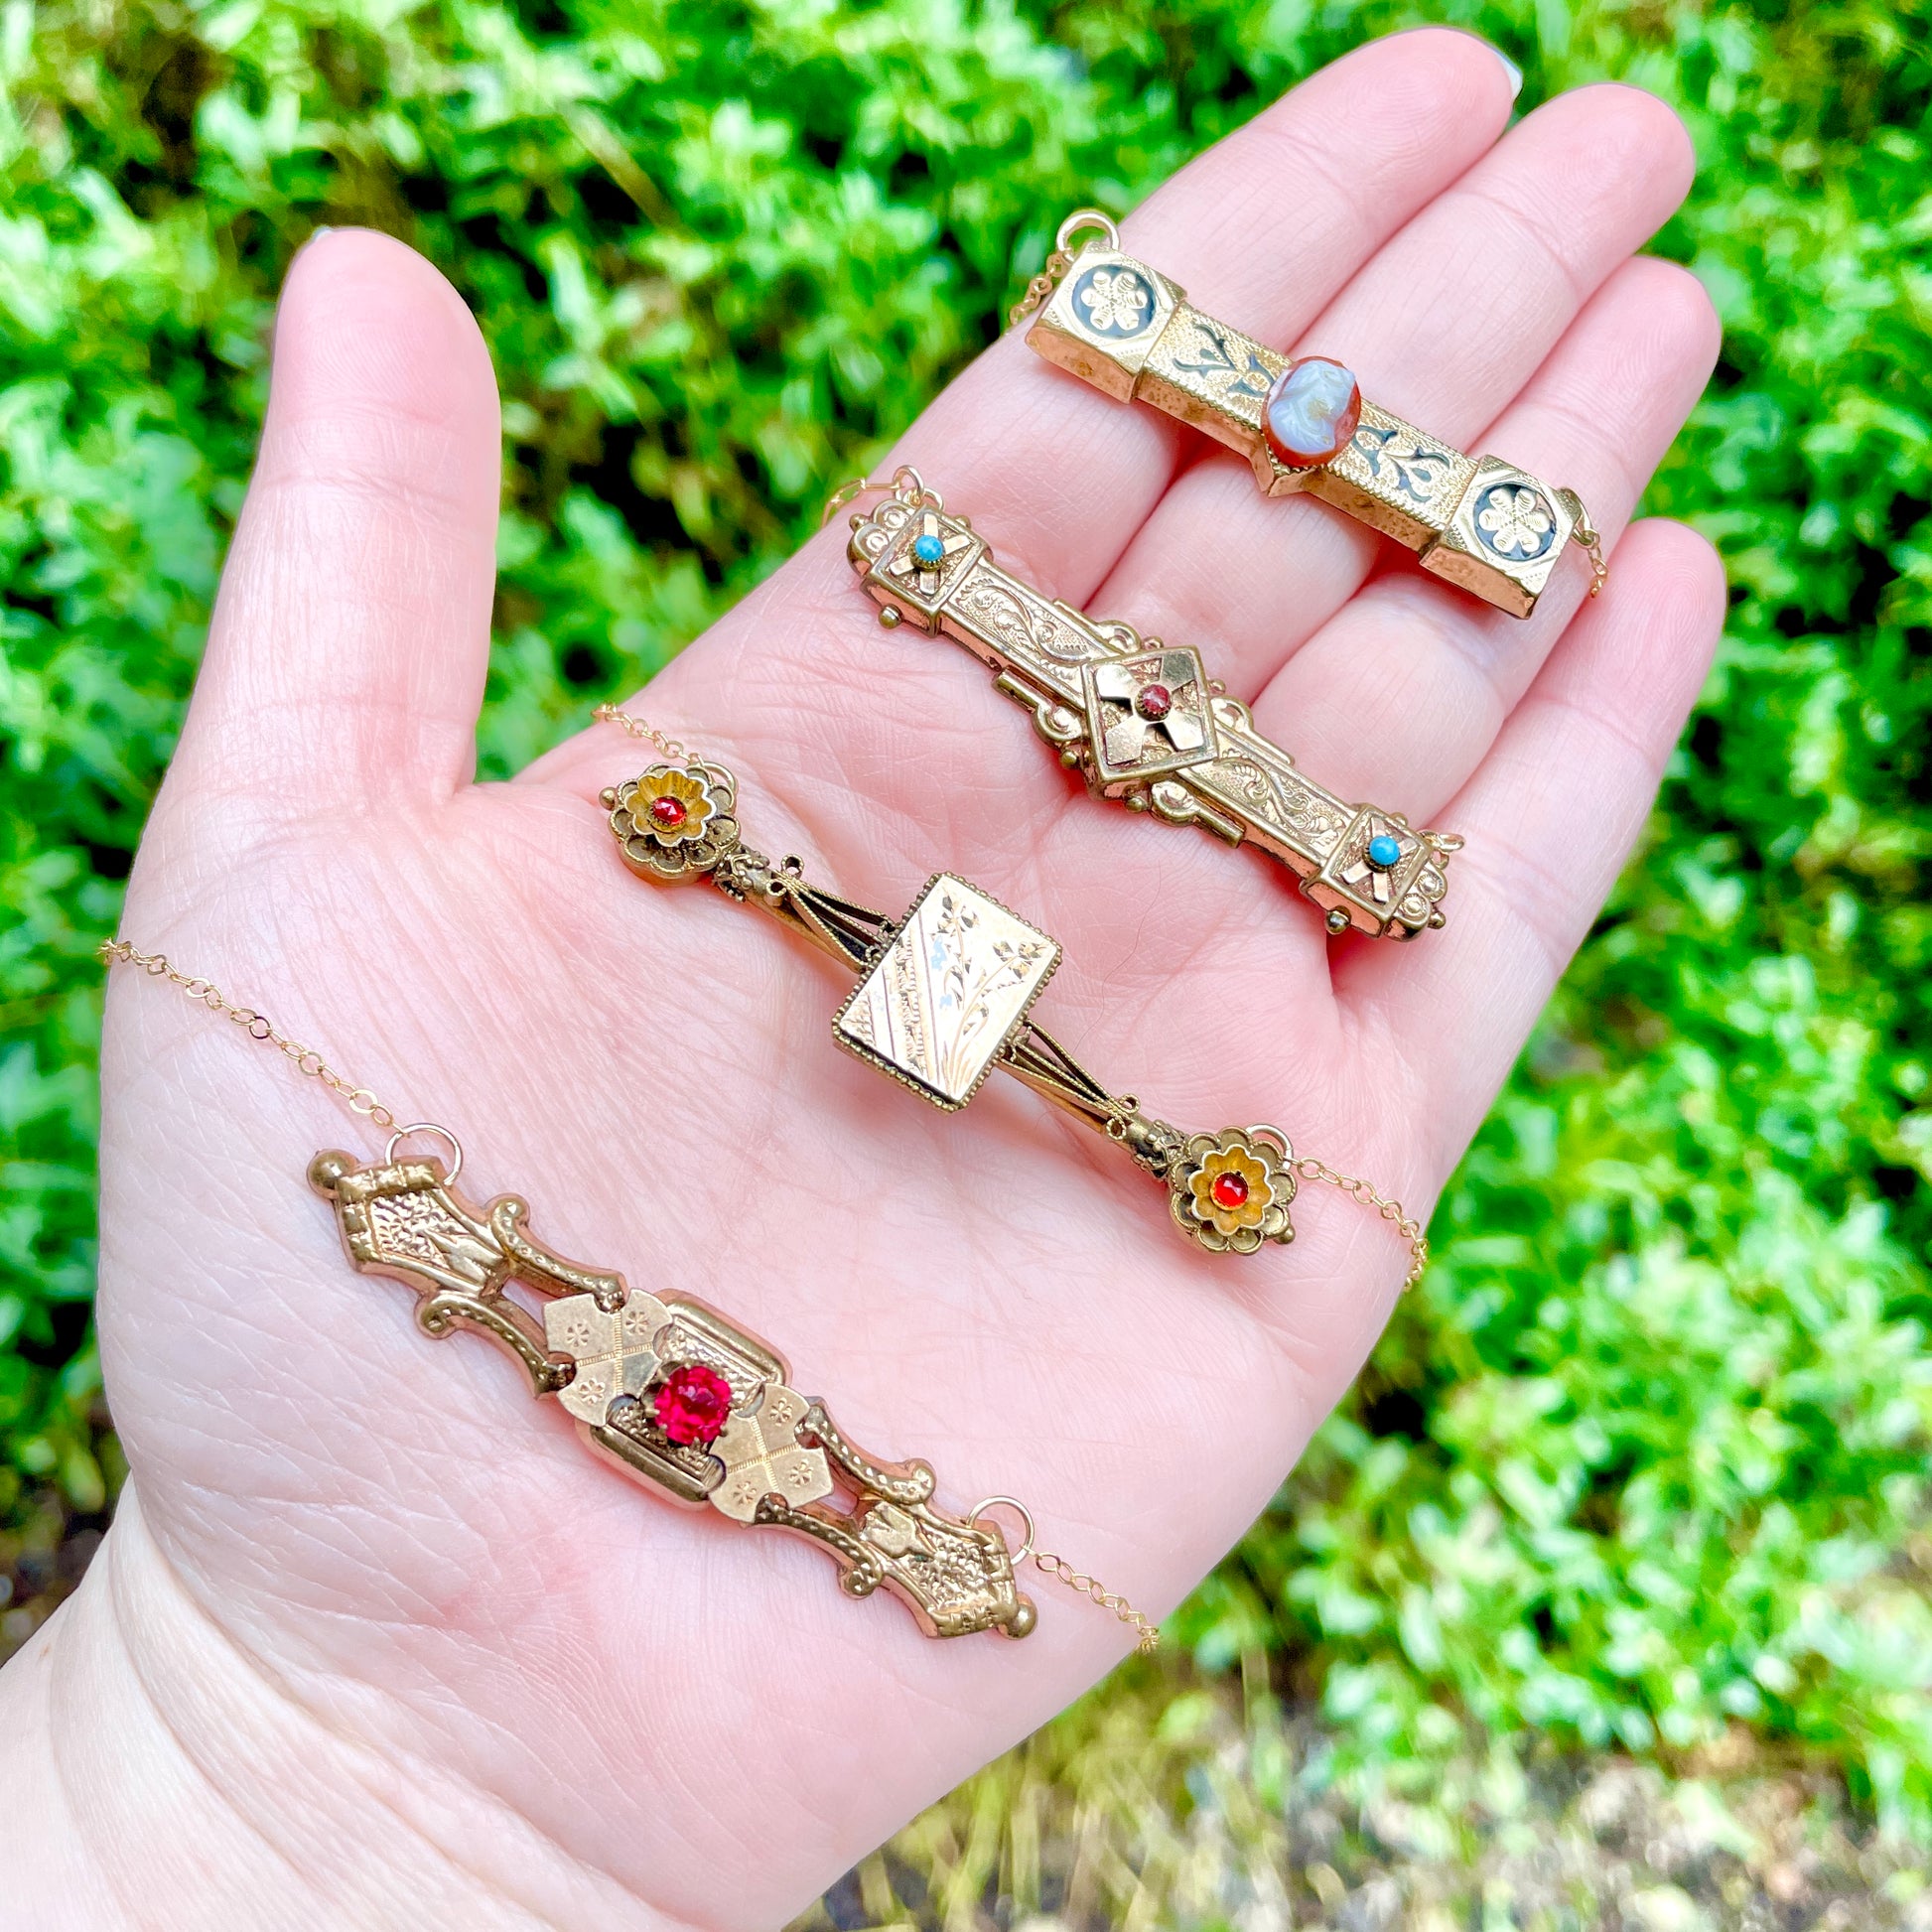 these are four victorian bar pin necklaces laying across the palm side of a left hand with greenery in the background